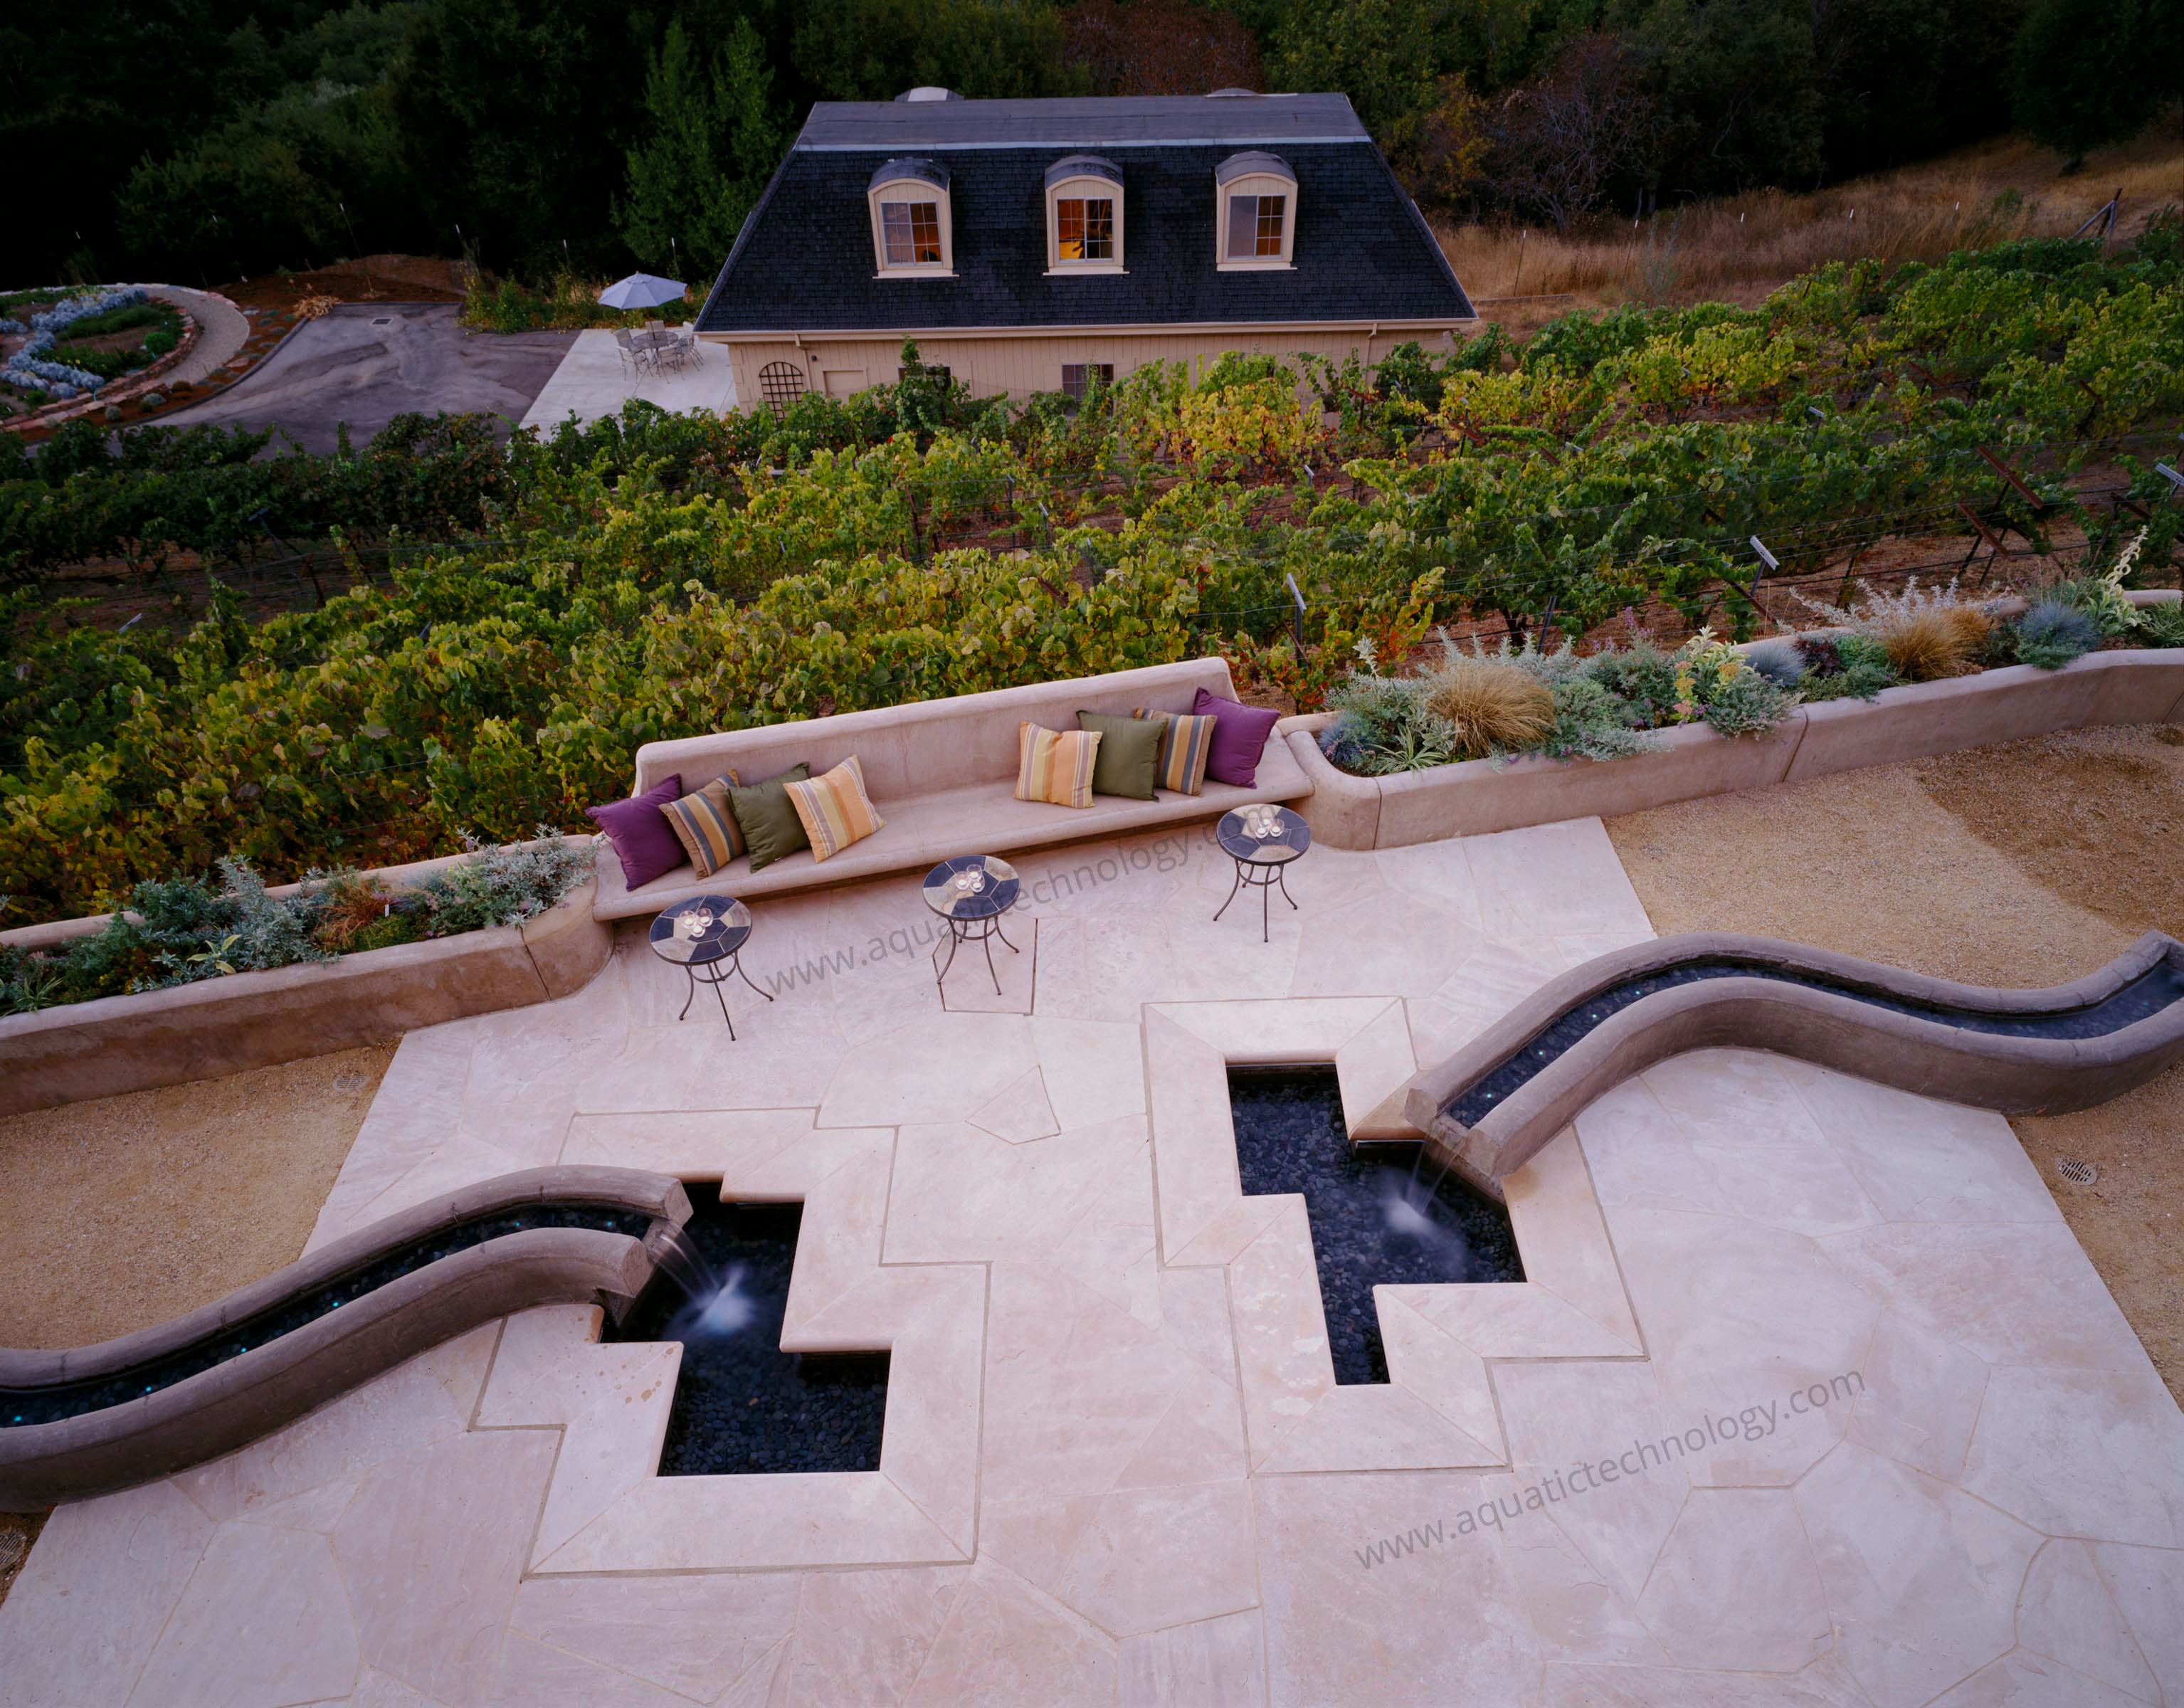 Colored concrete water features bench planters